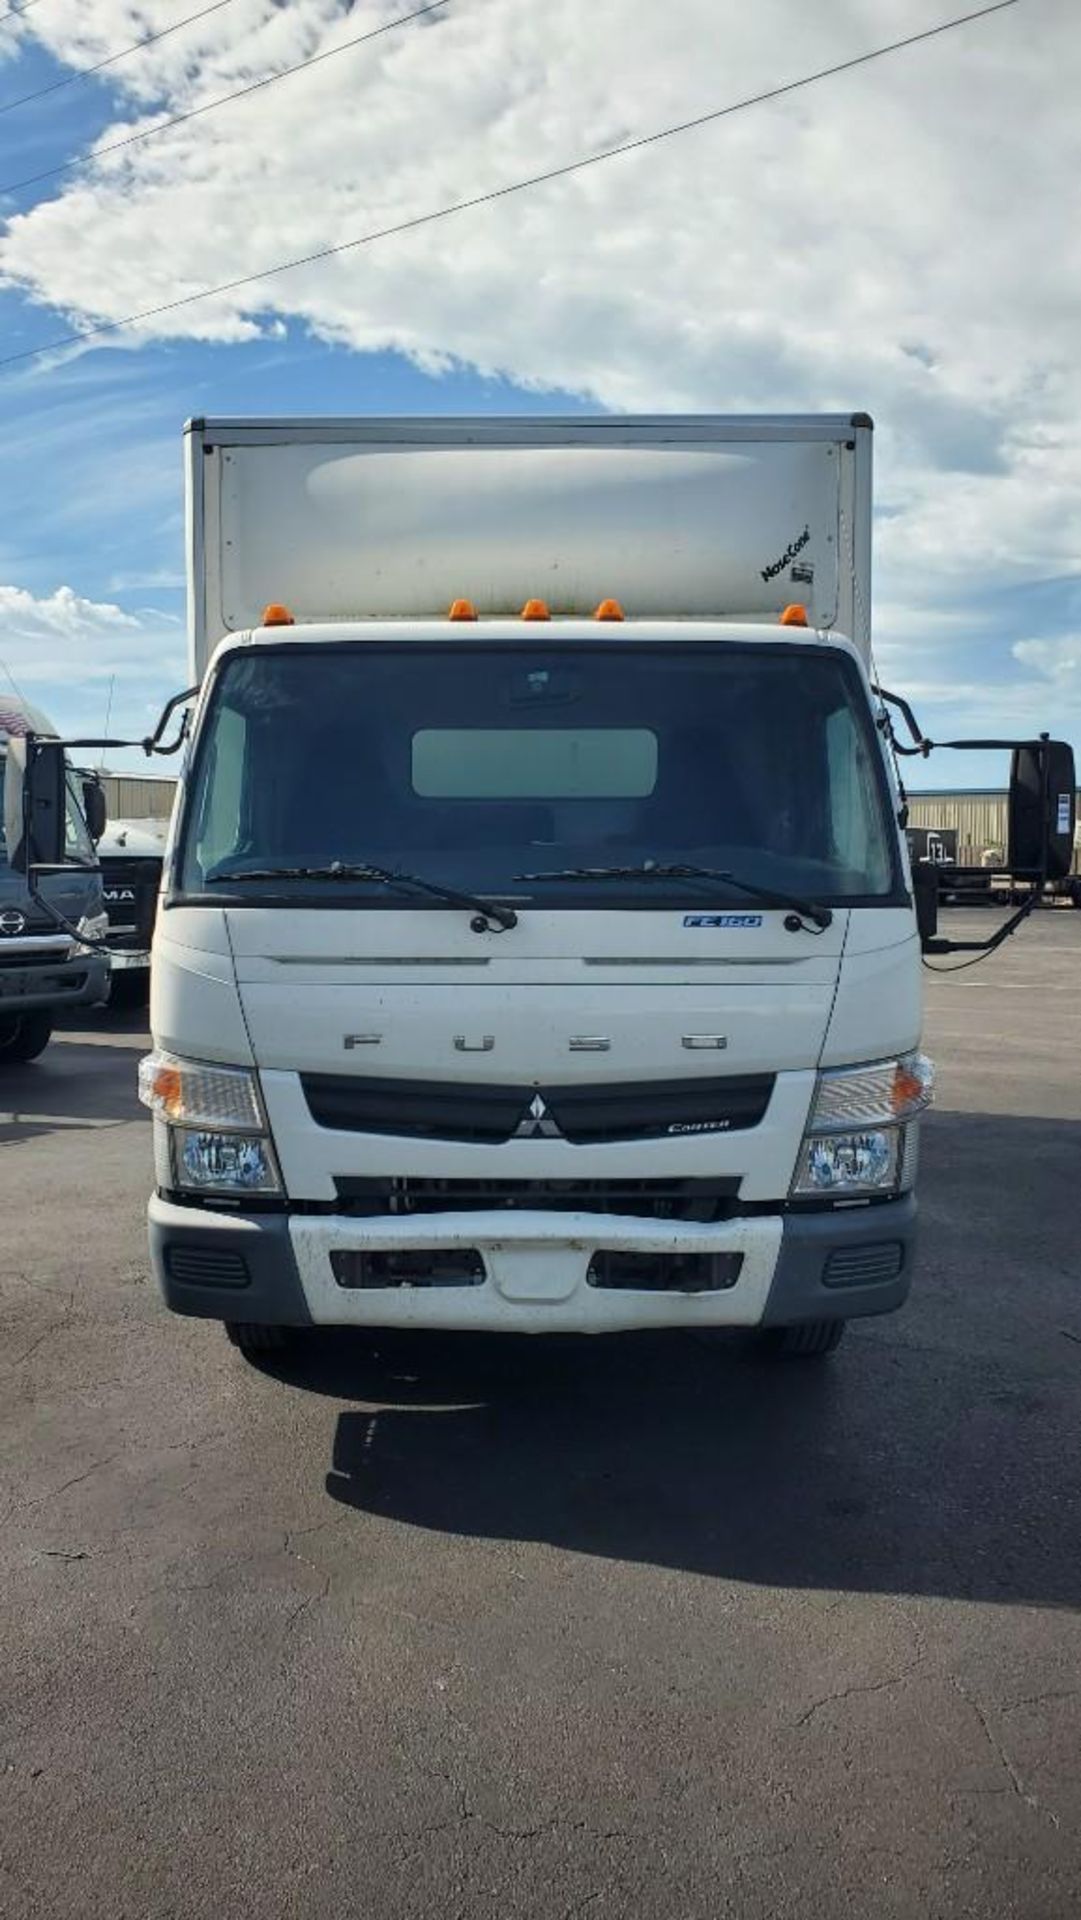 2015 MITSUBISHI FUSO FE180 BOX TRUCK APPROX 14' BOX, DIESEL ENGINE, AUTOMATIC TRANSMISSION - Image 8 of 39